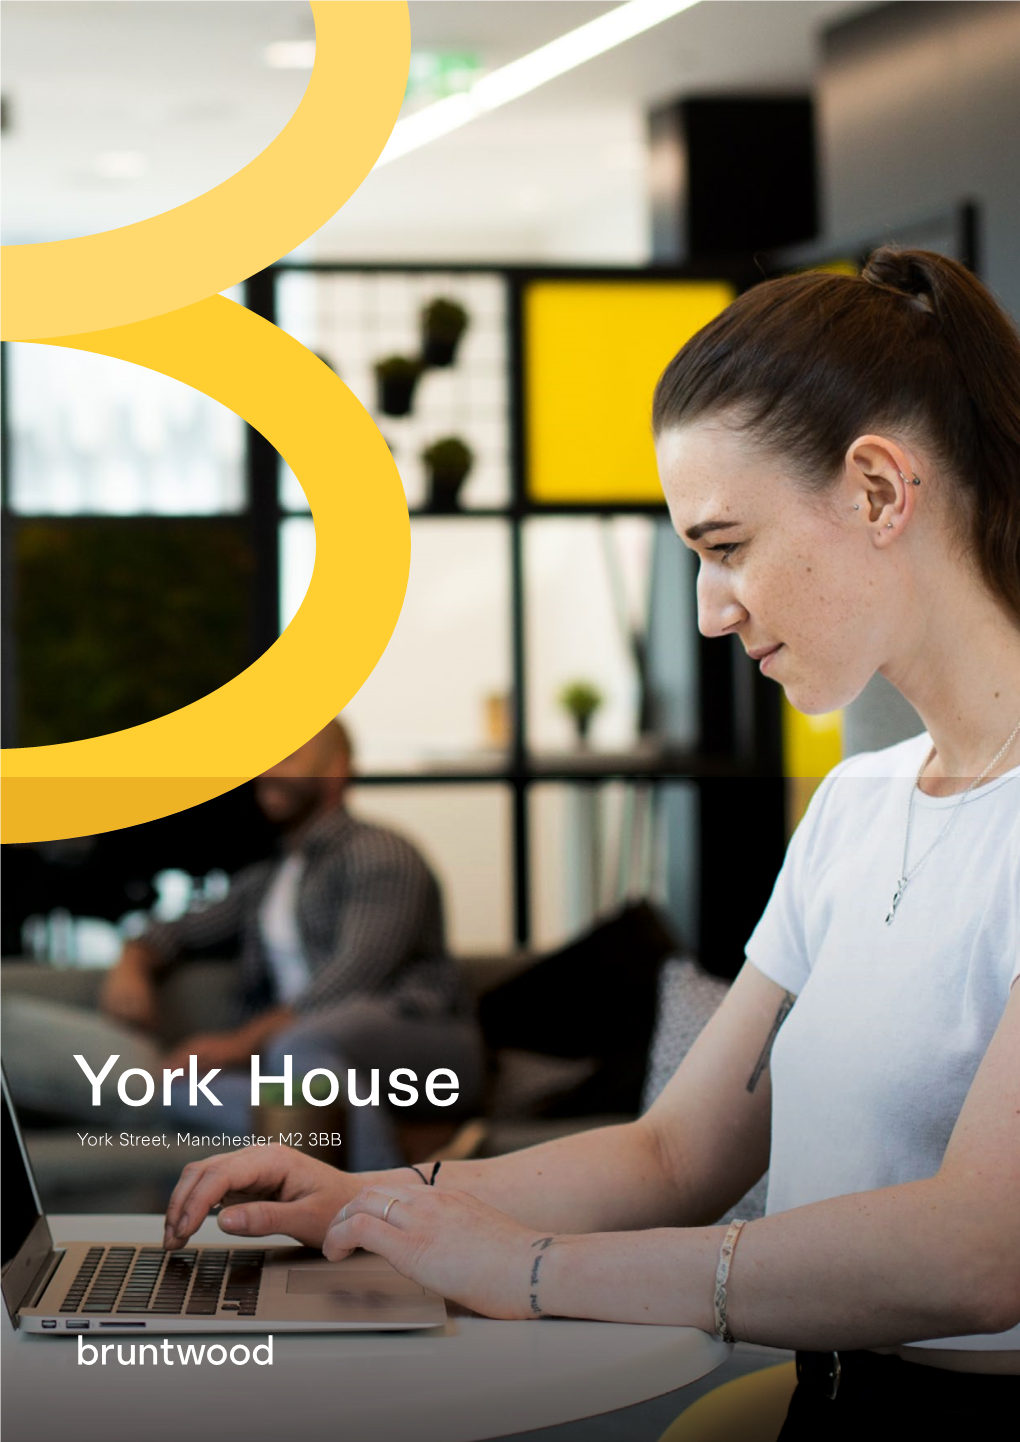 York House York Street, Manchester M2 3BB Welcome to York House